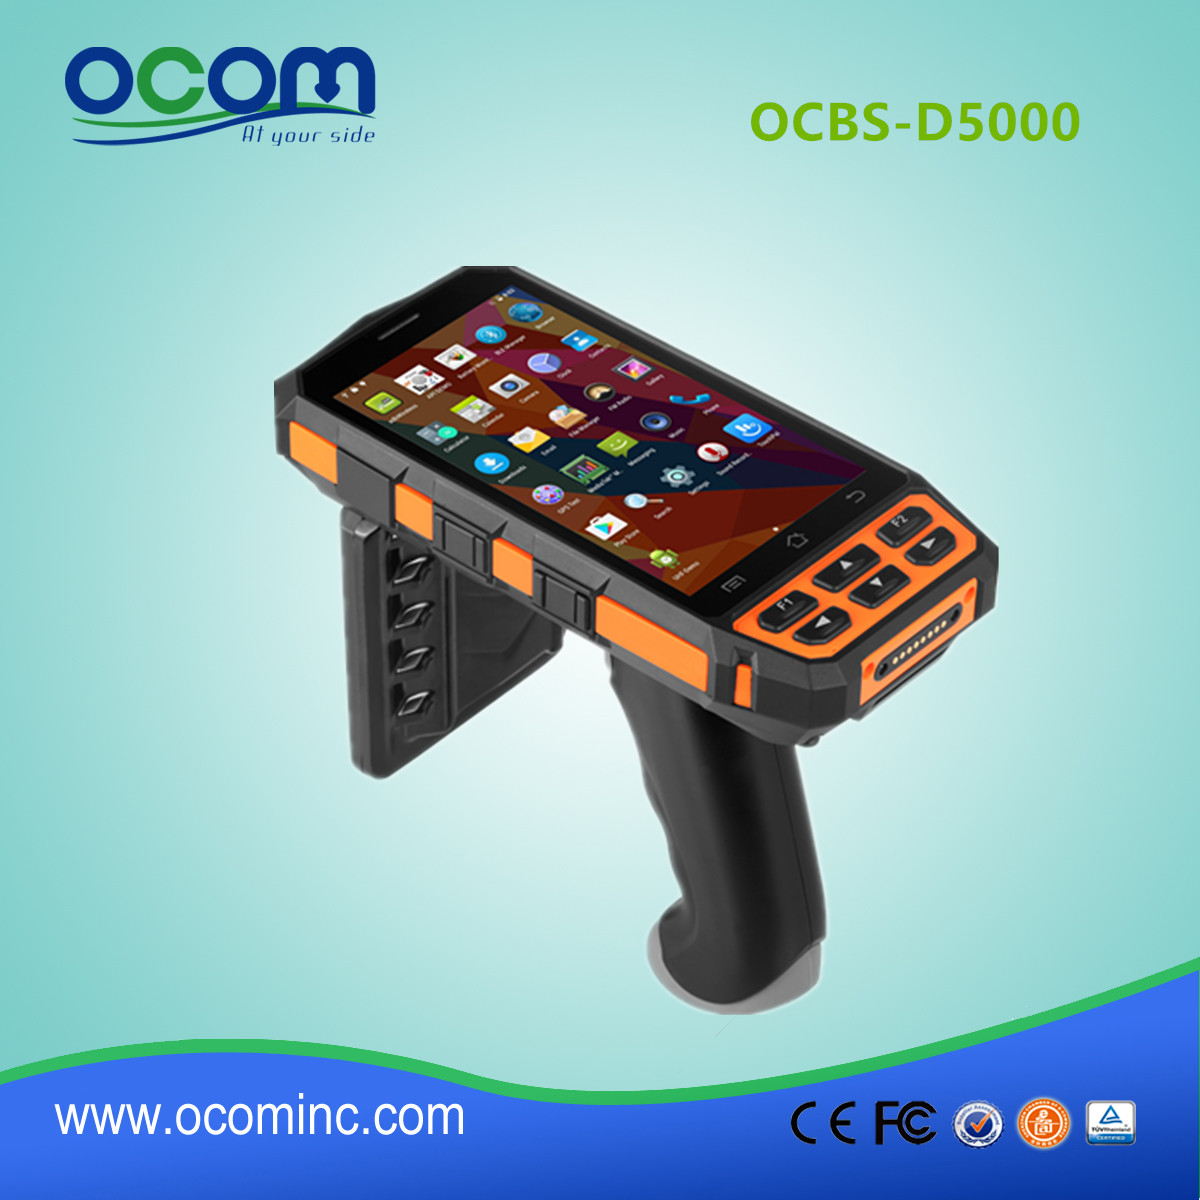 OCBS-D5000 ristorante handheld robusto android OS industriale pda RFID lettore